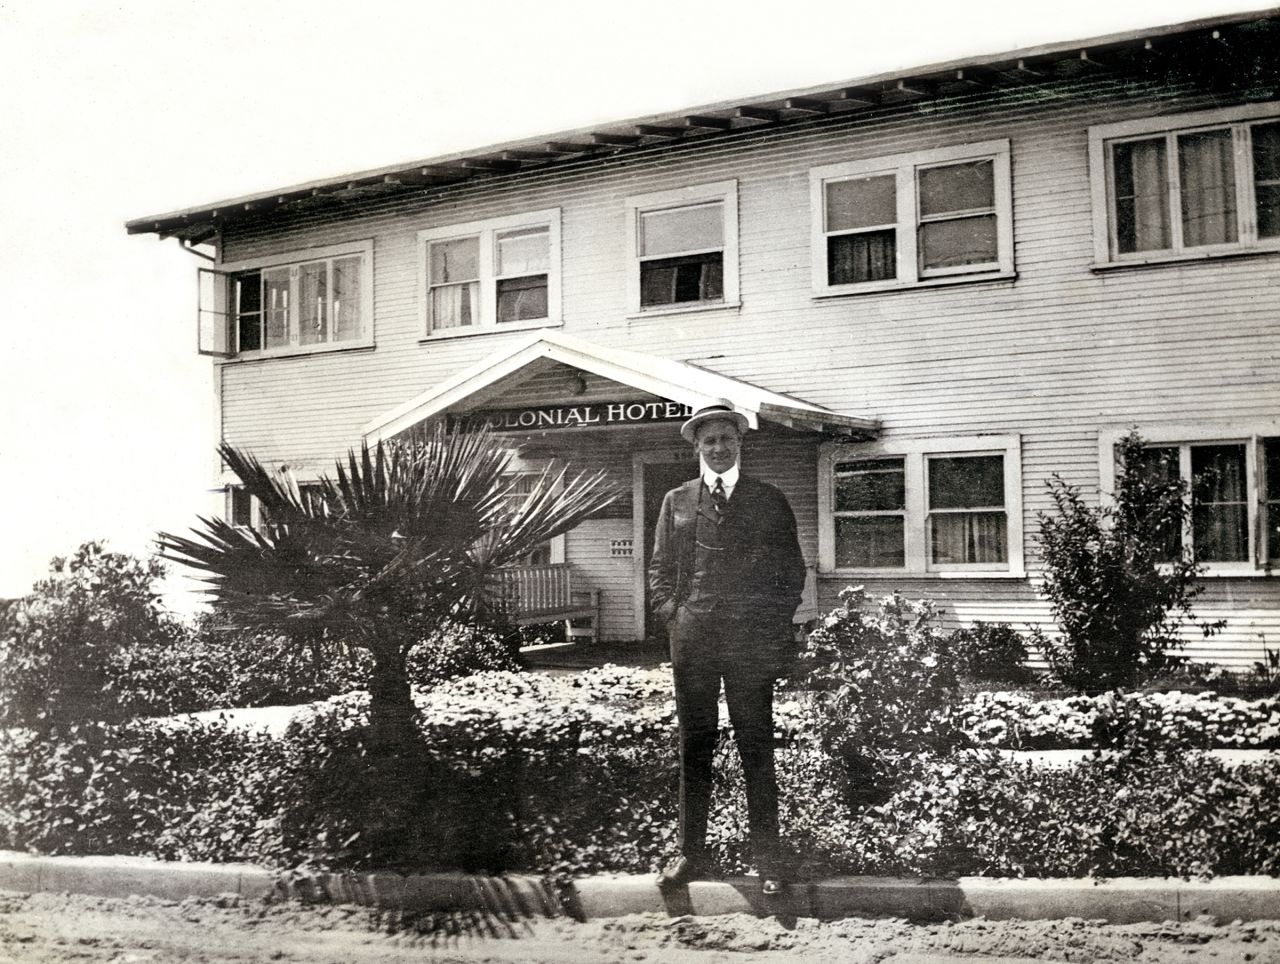 The Grande Colonial in La Jolla, California, had a modest start as the Colonial Apartments and Hotel in 1913.